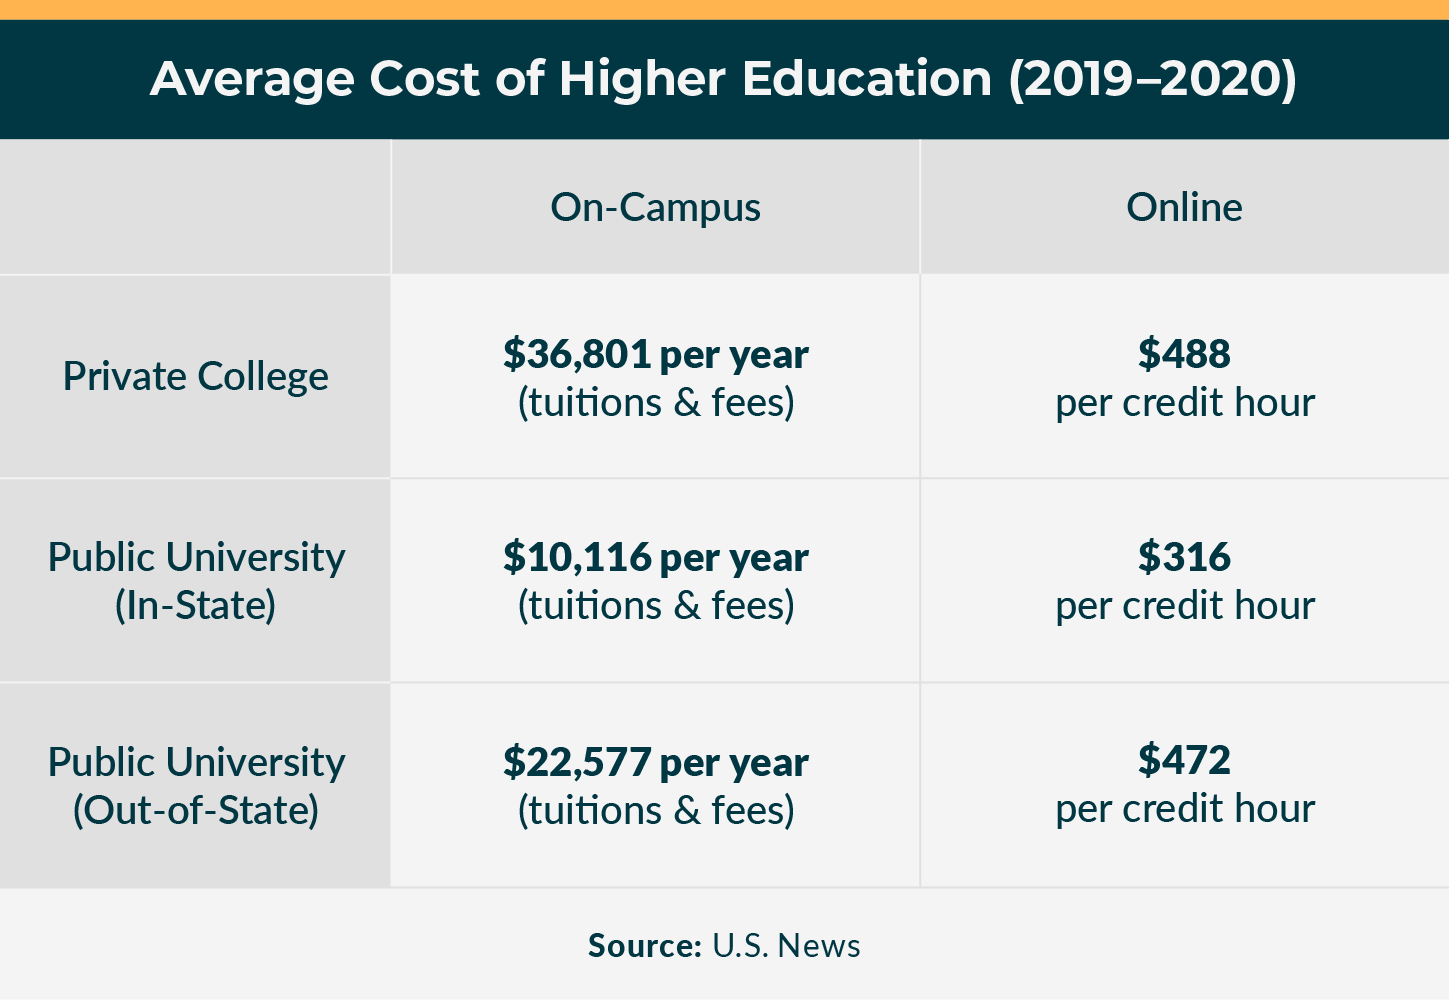 College vs. University - Usage, Difference, & Meaning